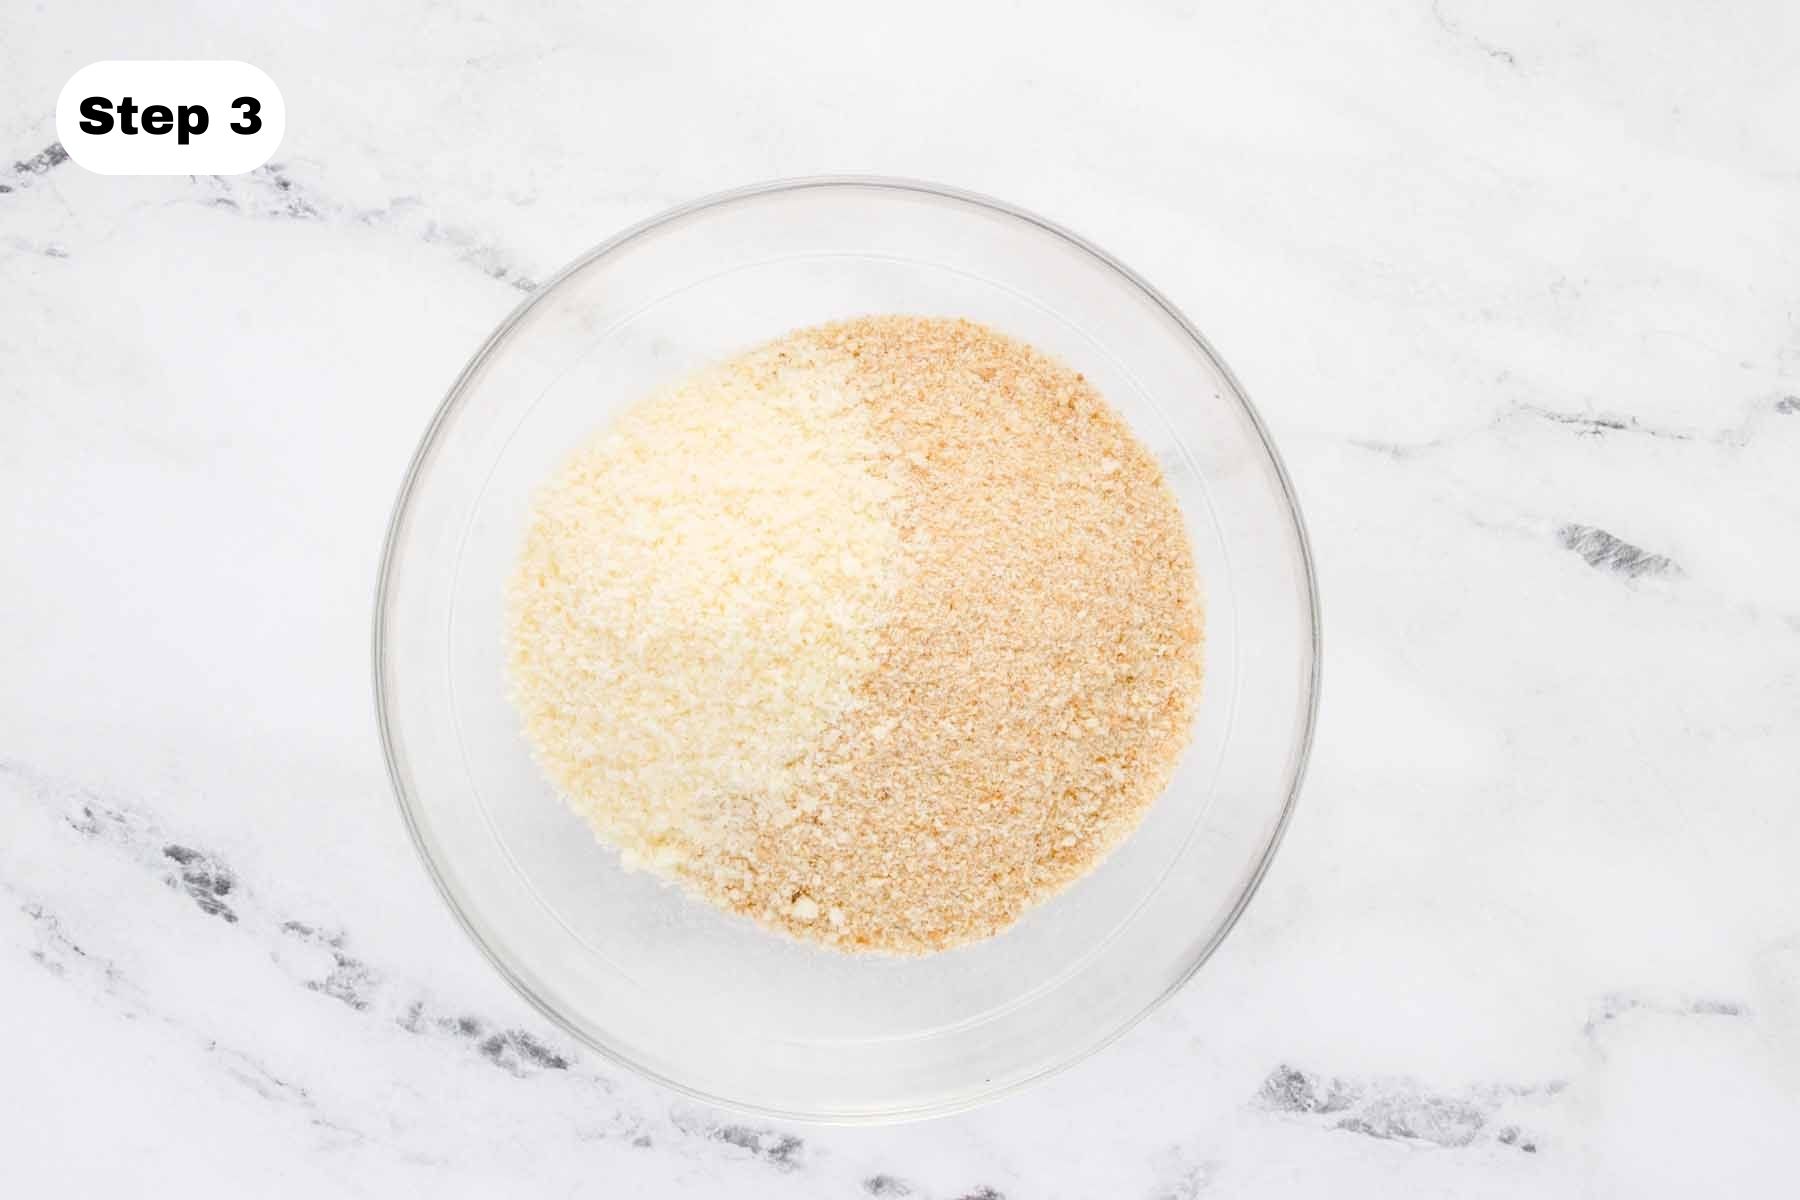 Parmesan and bread crumbs in a glass bowl.